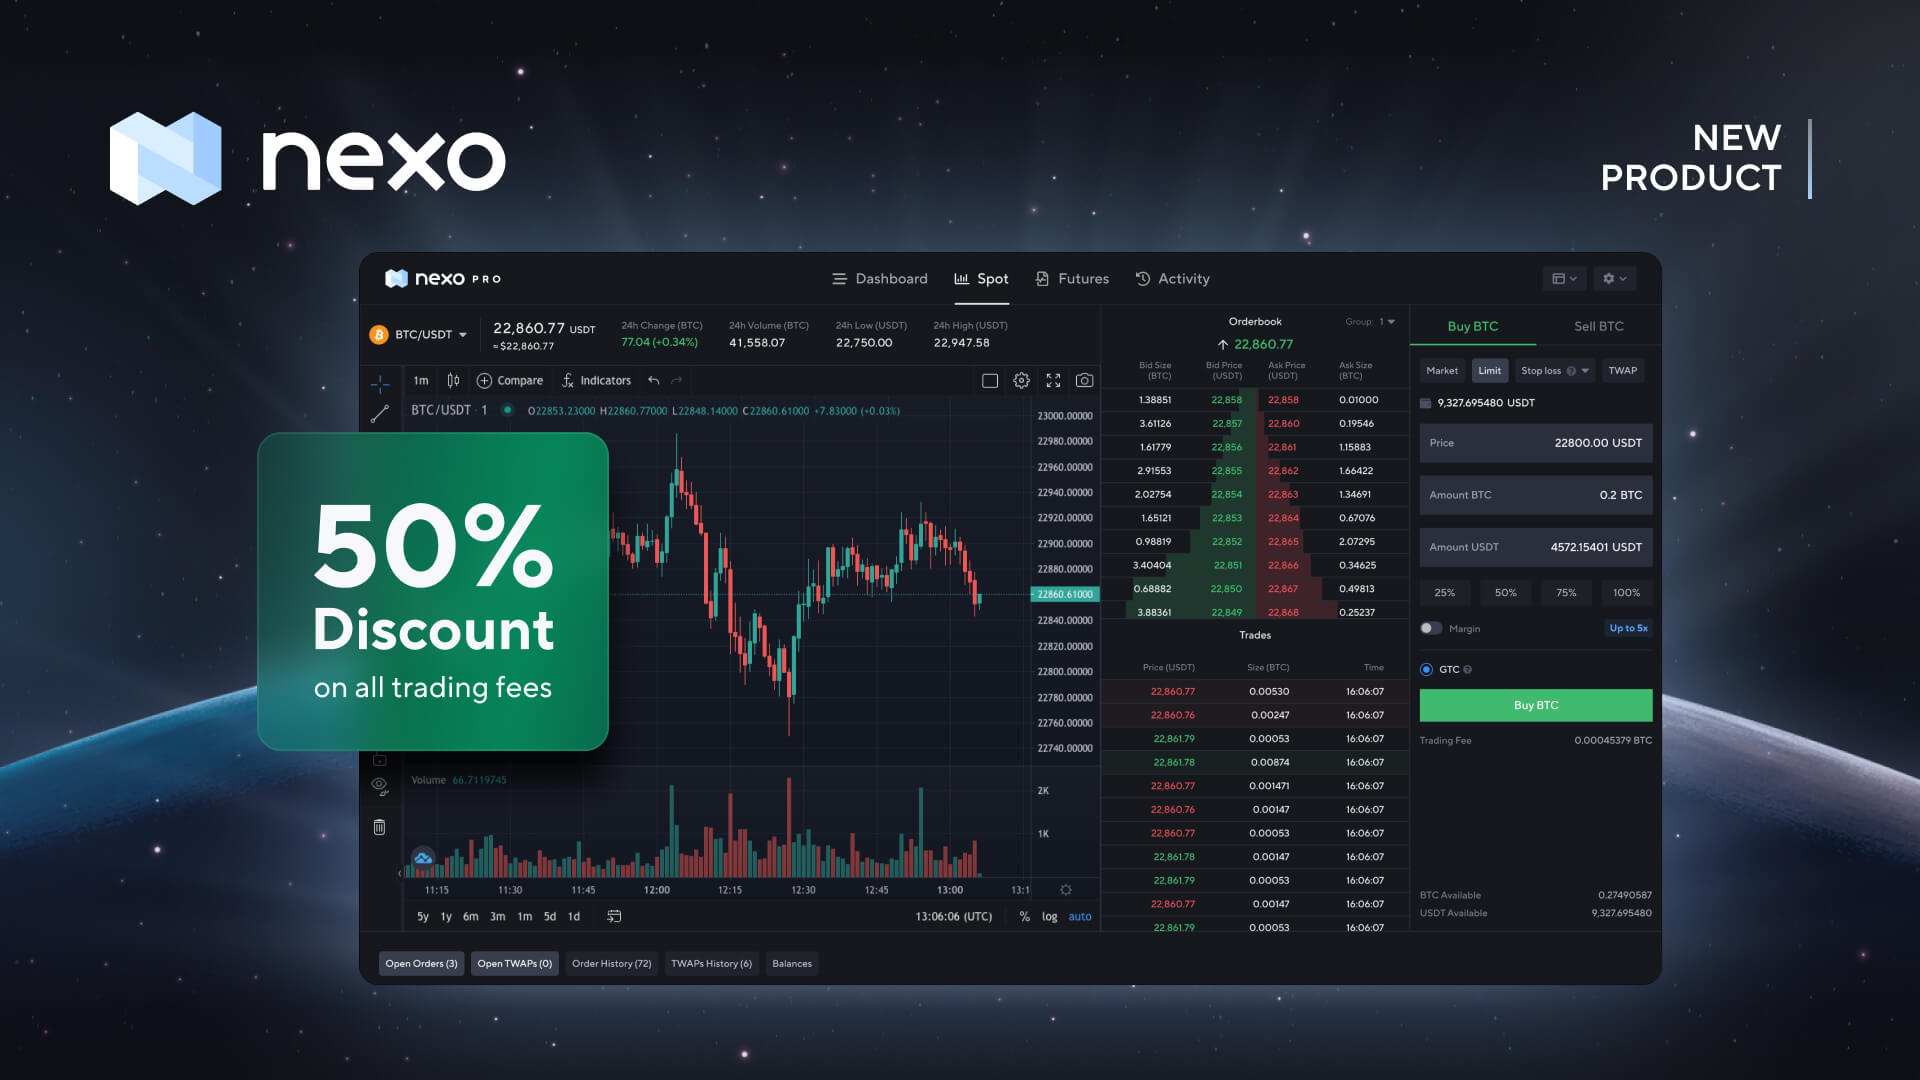 Nexo Pro Launches to Offer the Retail Aggregated Liquidity and Tools Previously Available Only to Professionals